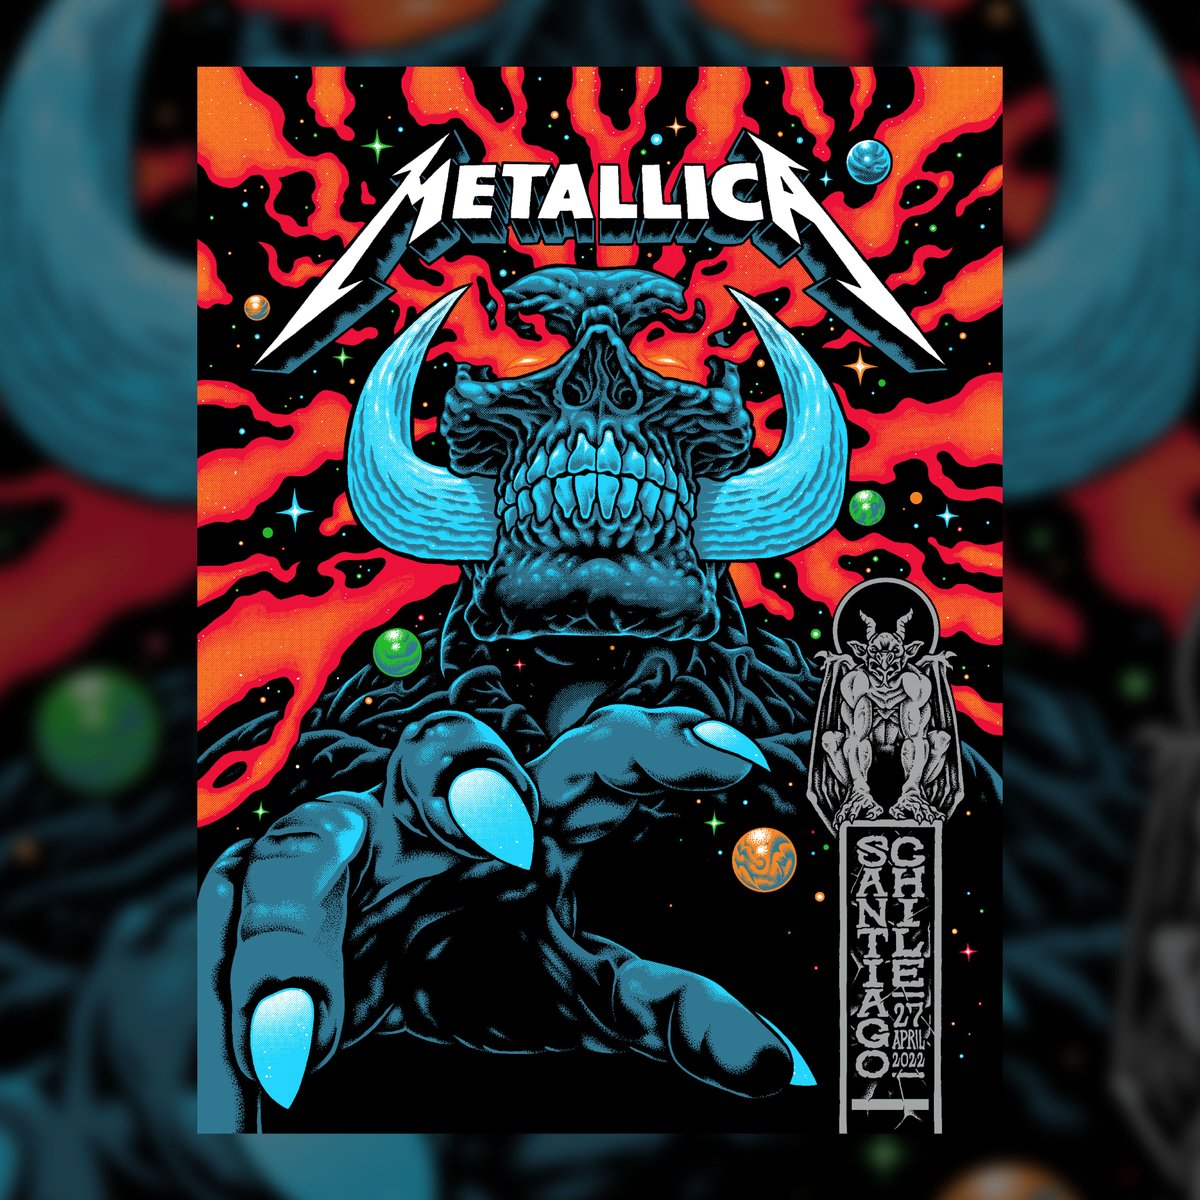 Yesterday’s poster from the gig in Santiago, Chile was designed by Pitchgrim and is available now at Metallica.com & through Probity Merch. ➡ metallica.com/store ➡ metallica.probitymerch.com